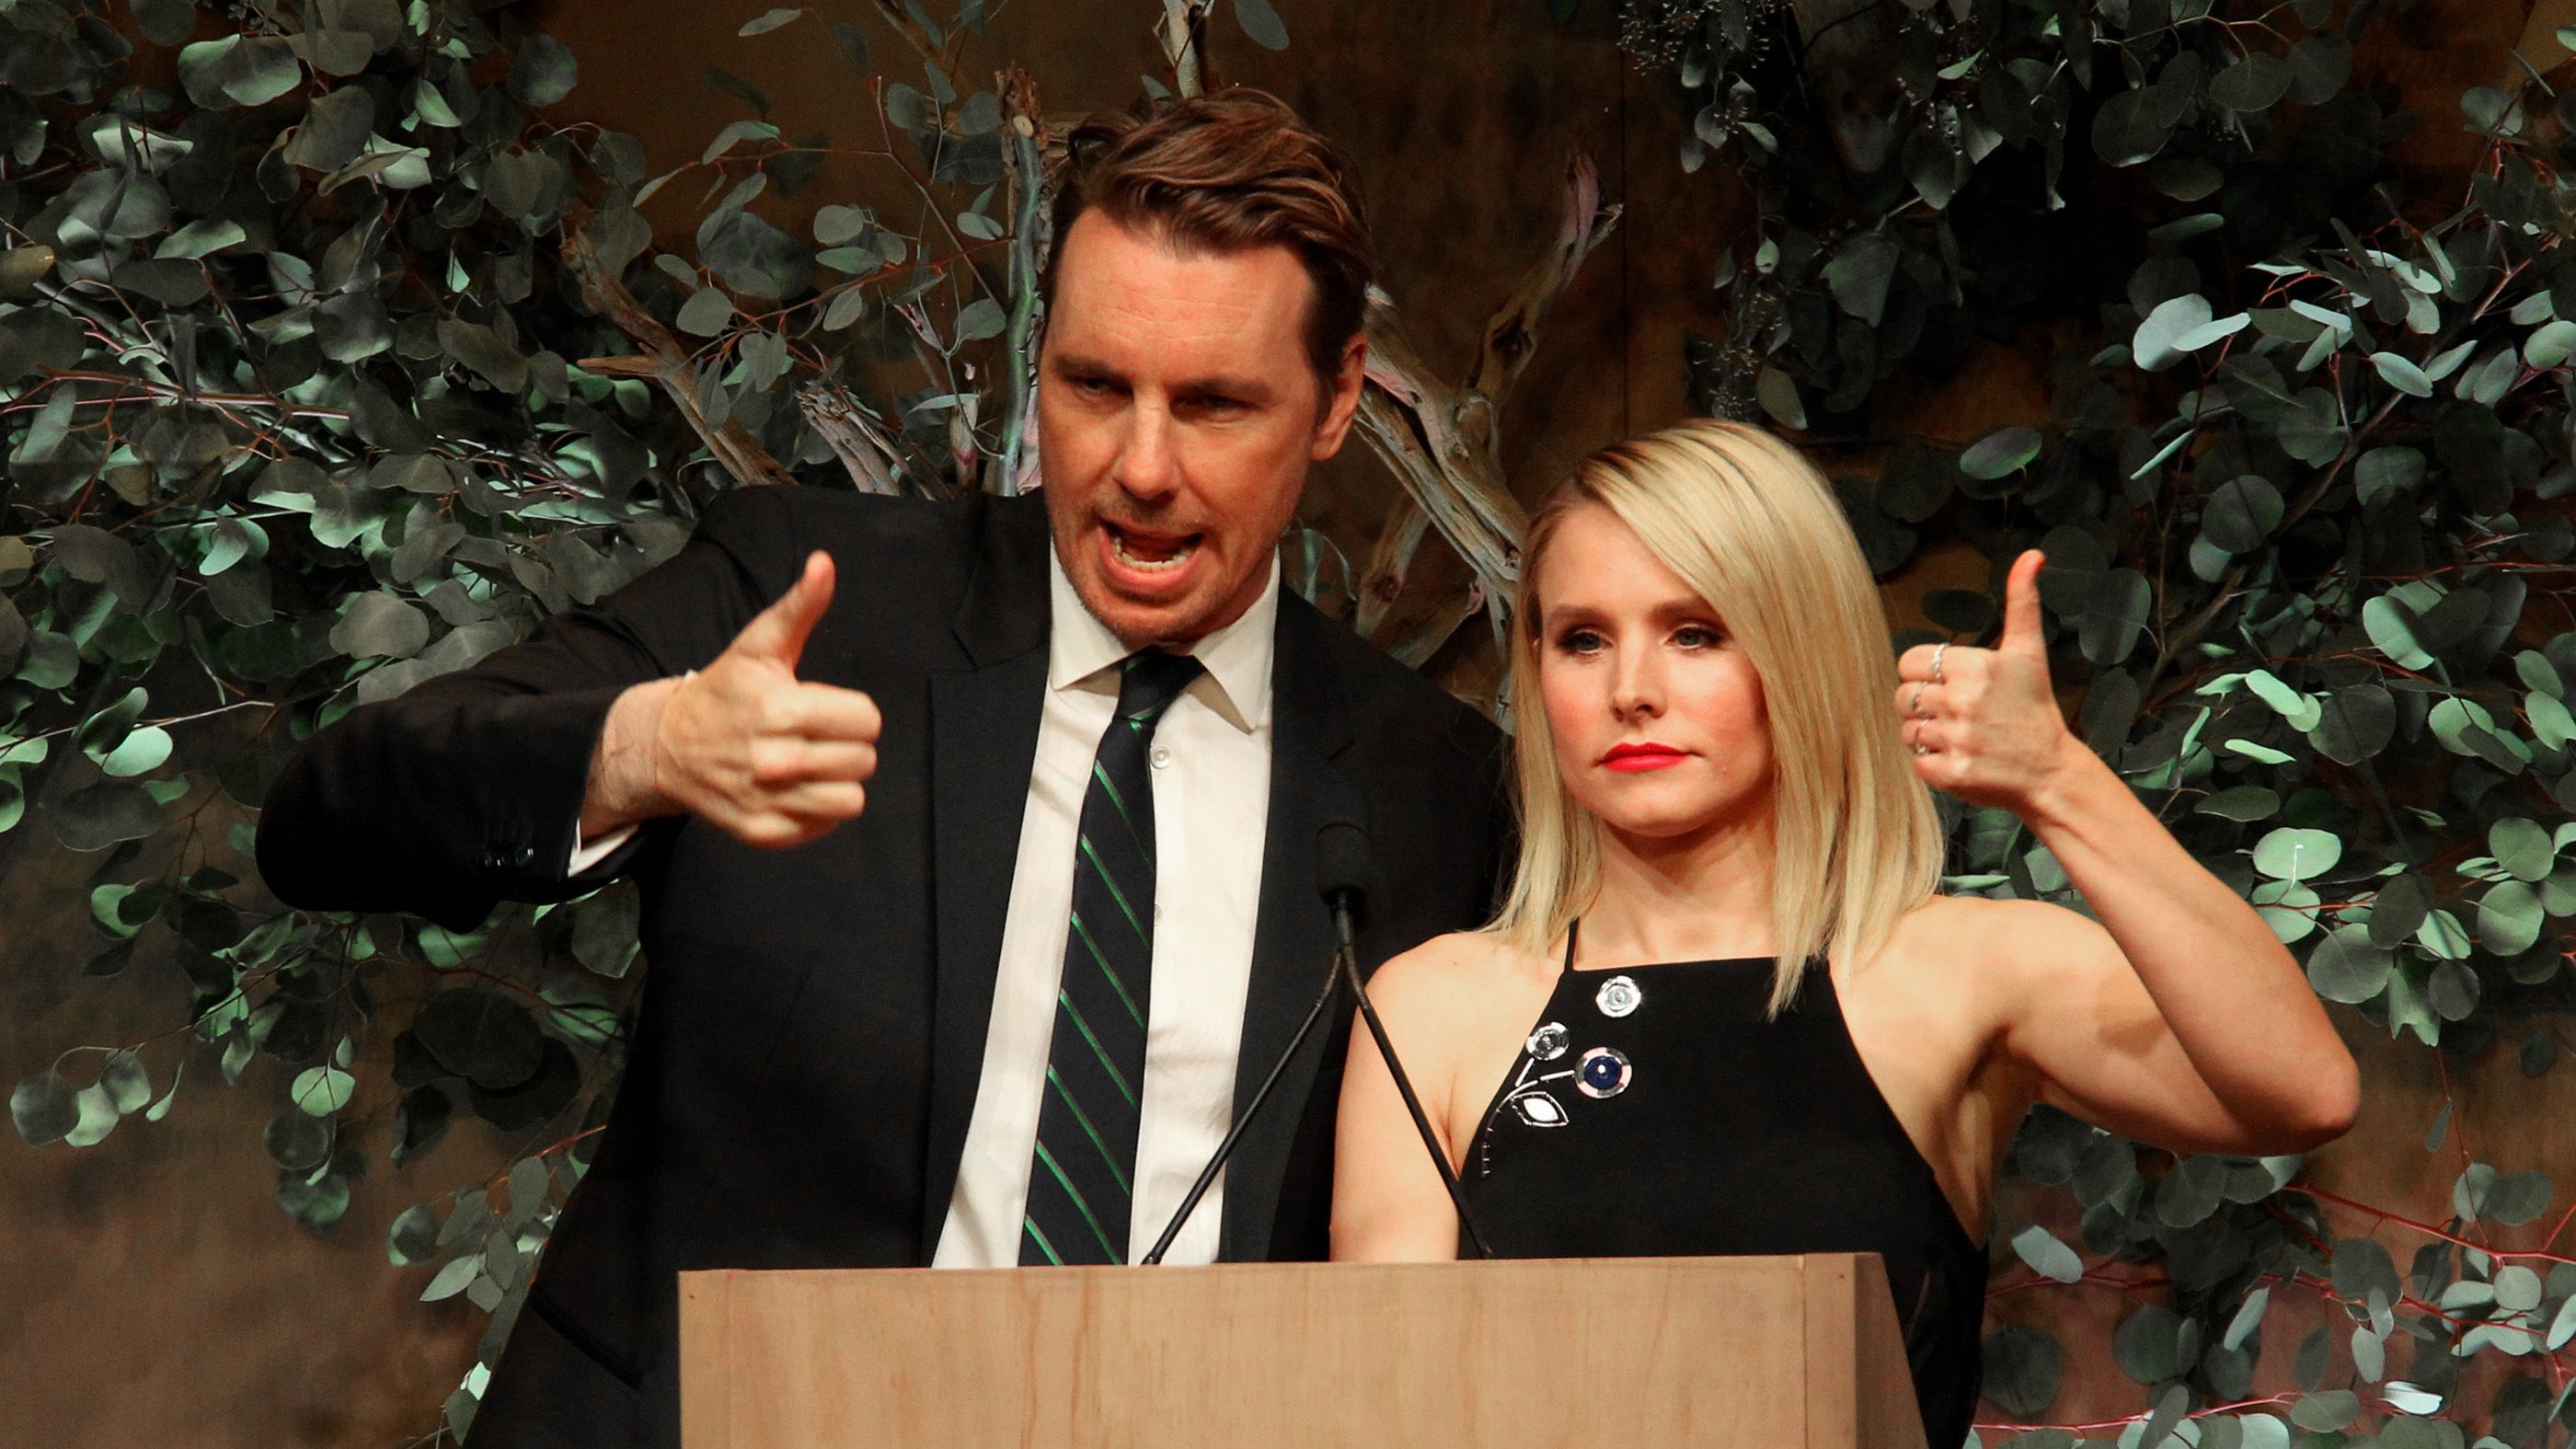 Excited for Game of Thrones? Kristen Bell and Dax Shepard Might Have You Beat